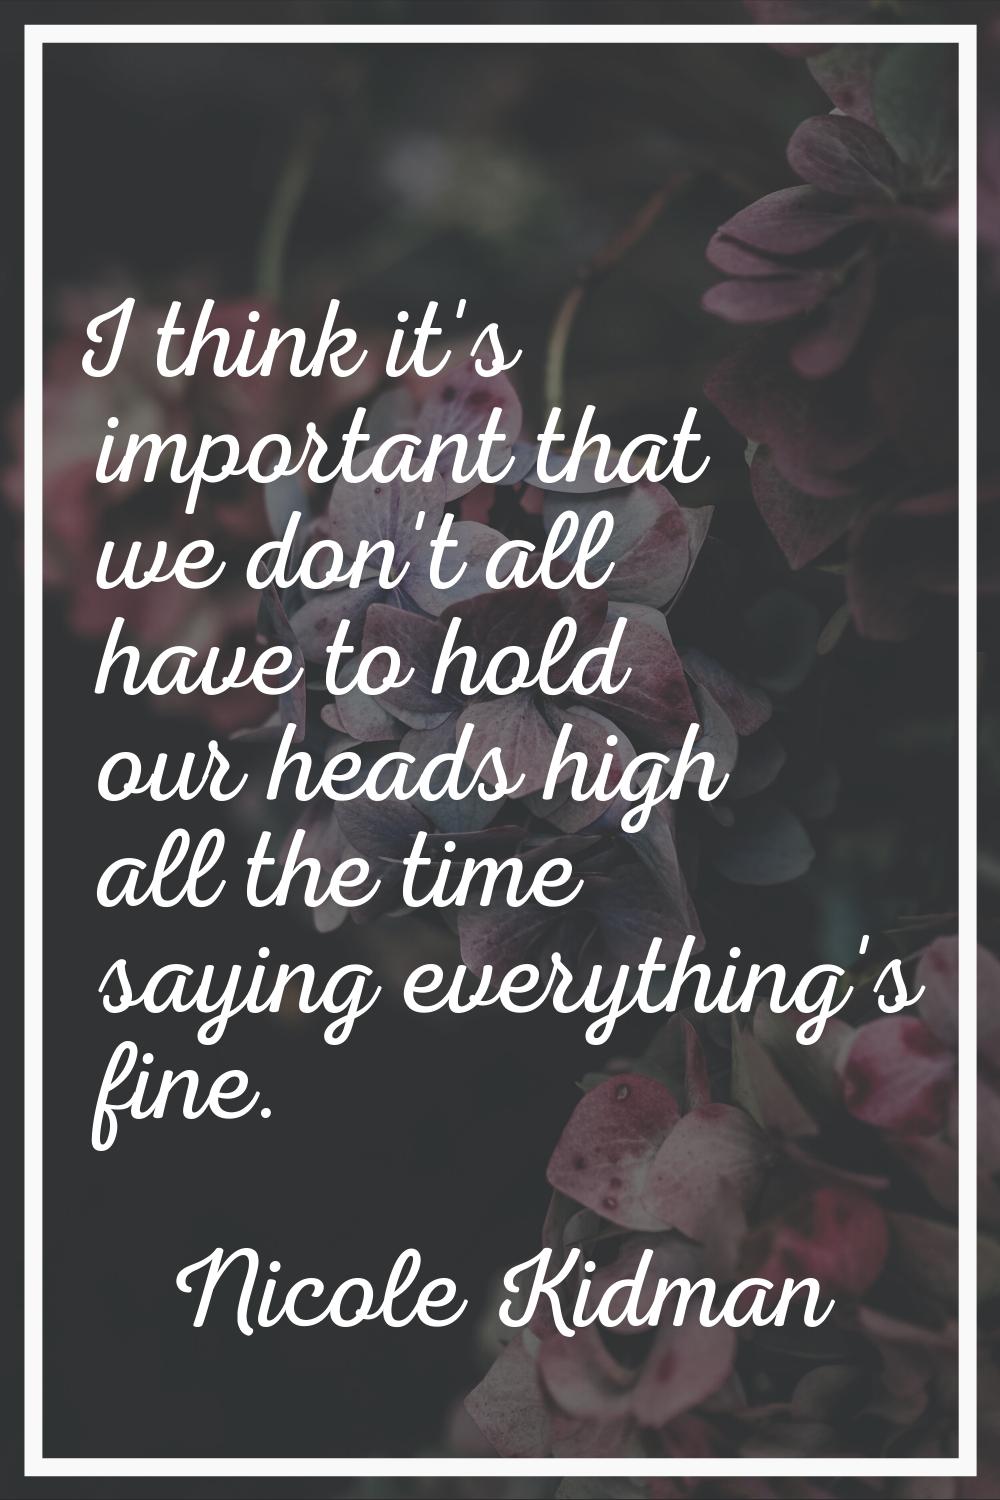 I think it's important that we don't all have to hold our heads high all the time saying everything